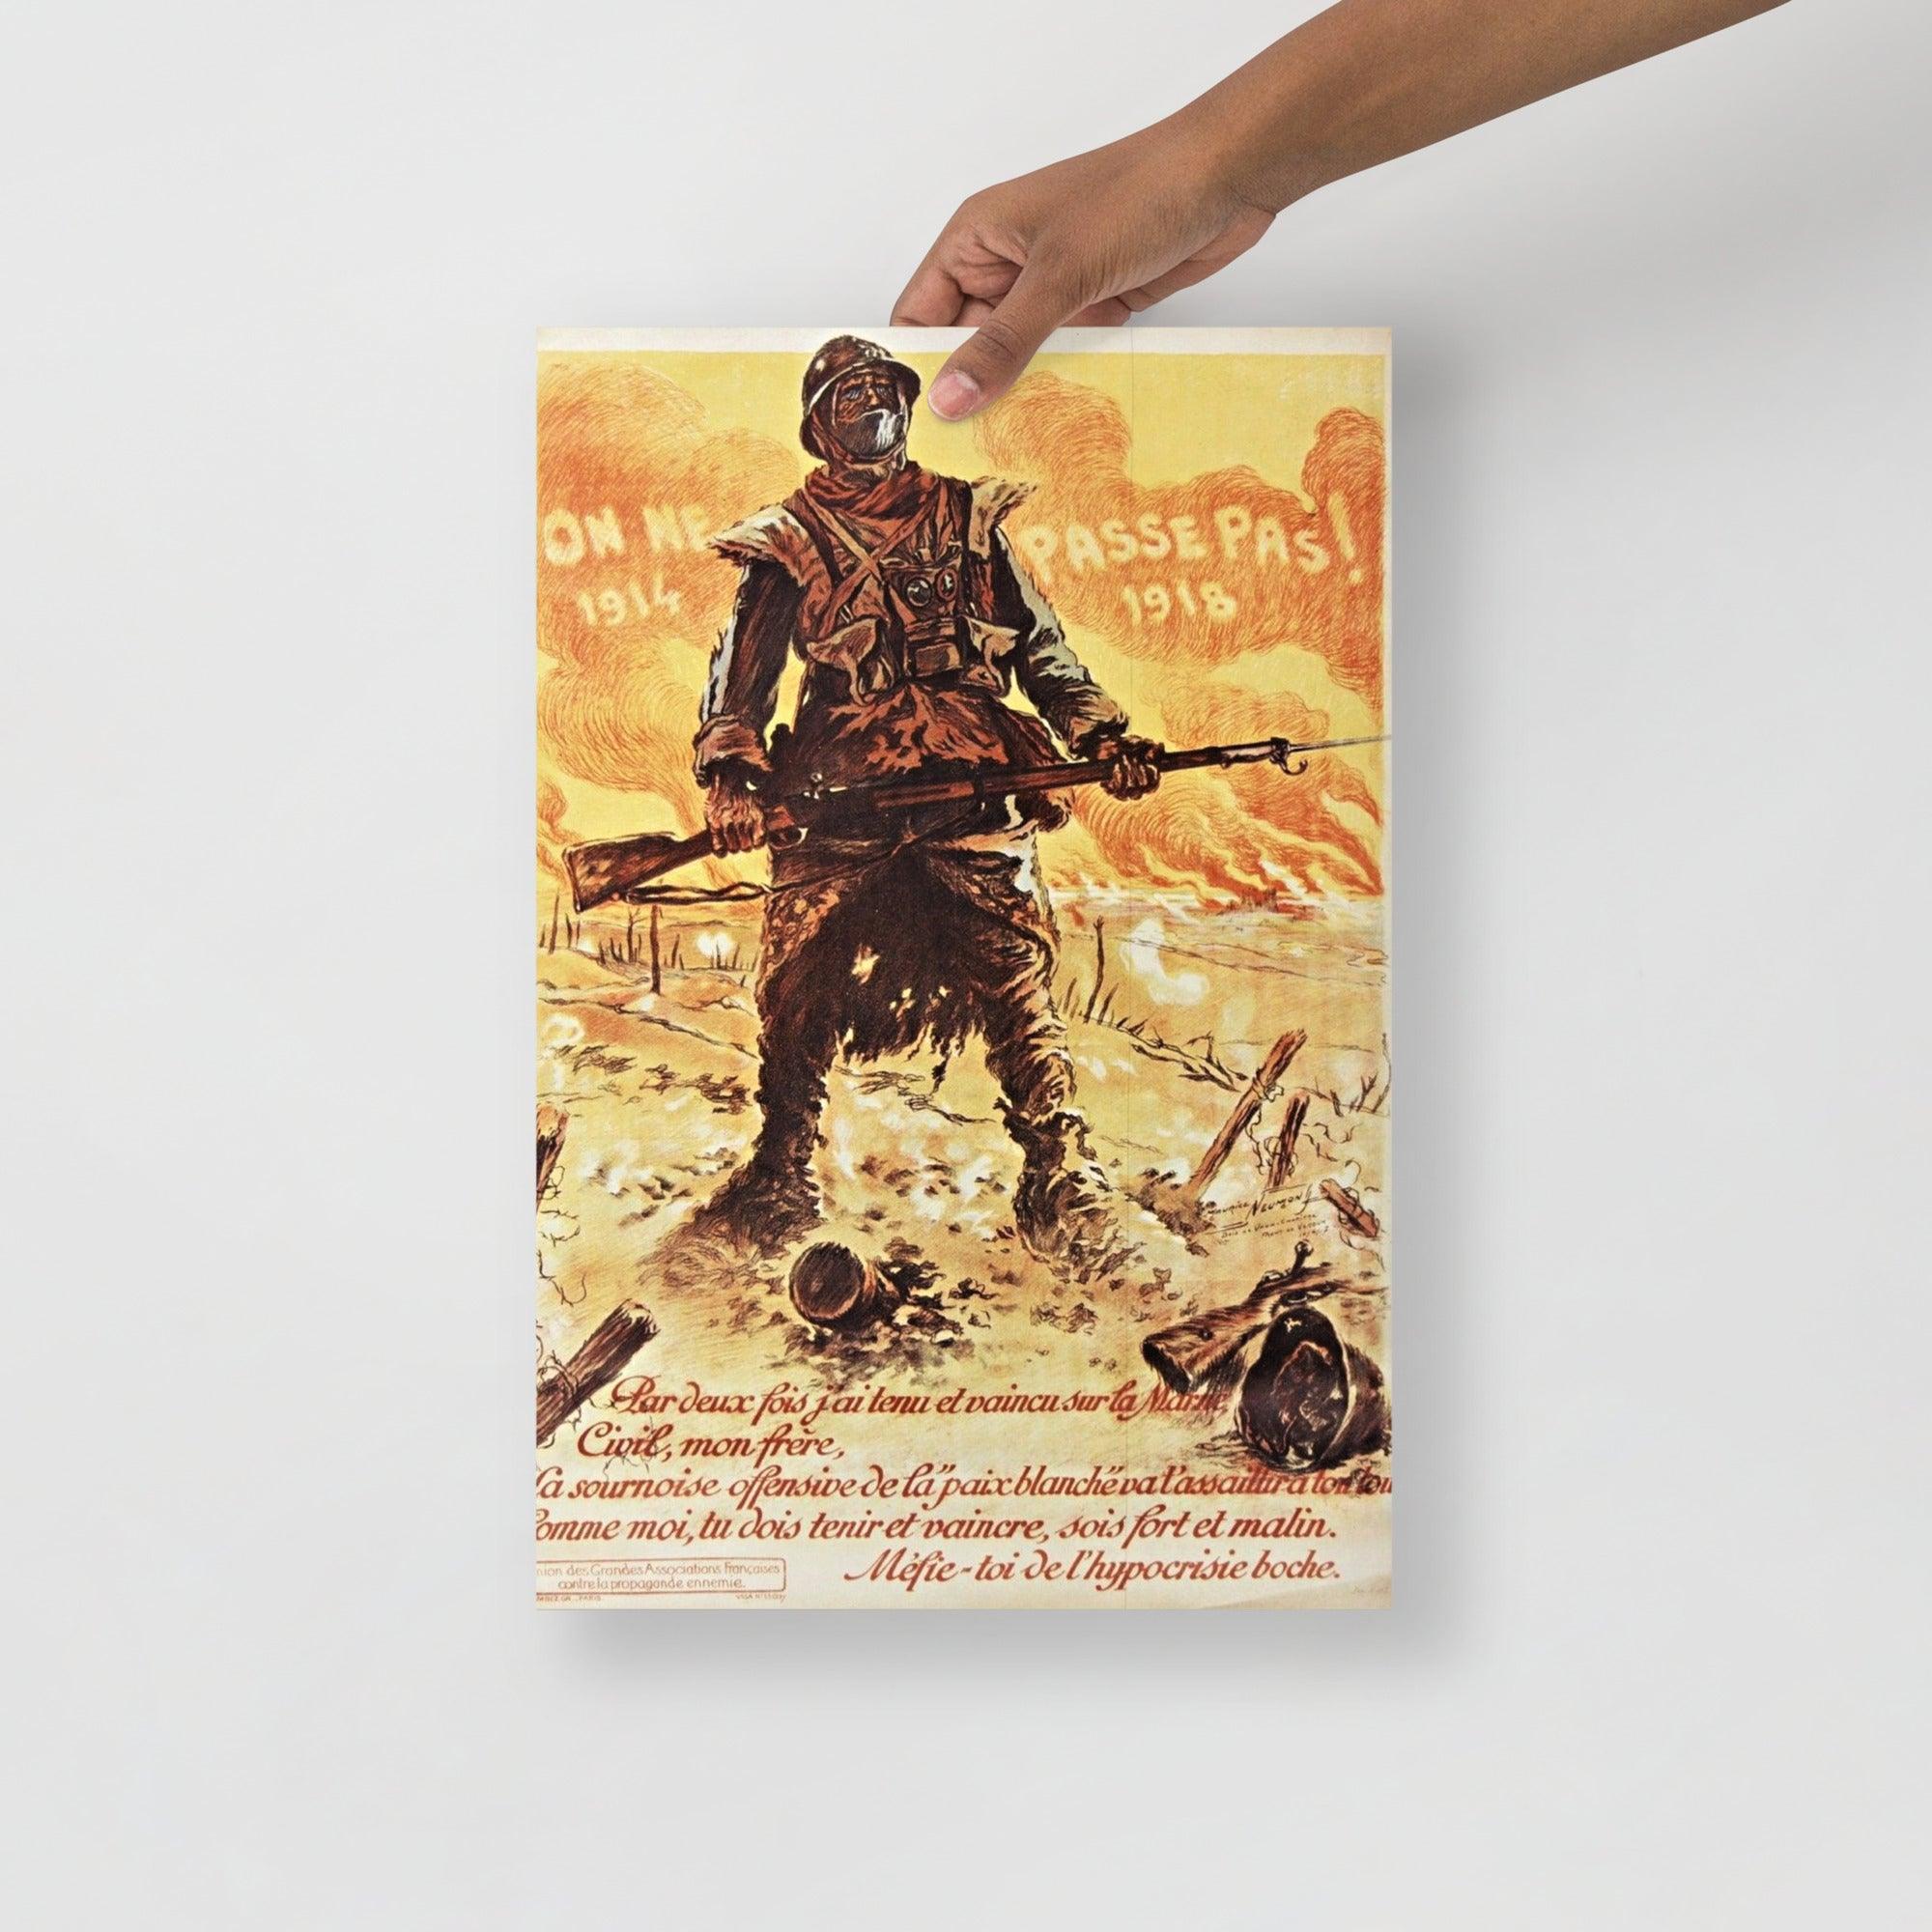 A They Shall Not Pass (On Ne Passe Pas) By Maurice Neumont poster on a plain backdrop in size 12x18”.